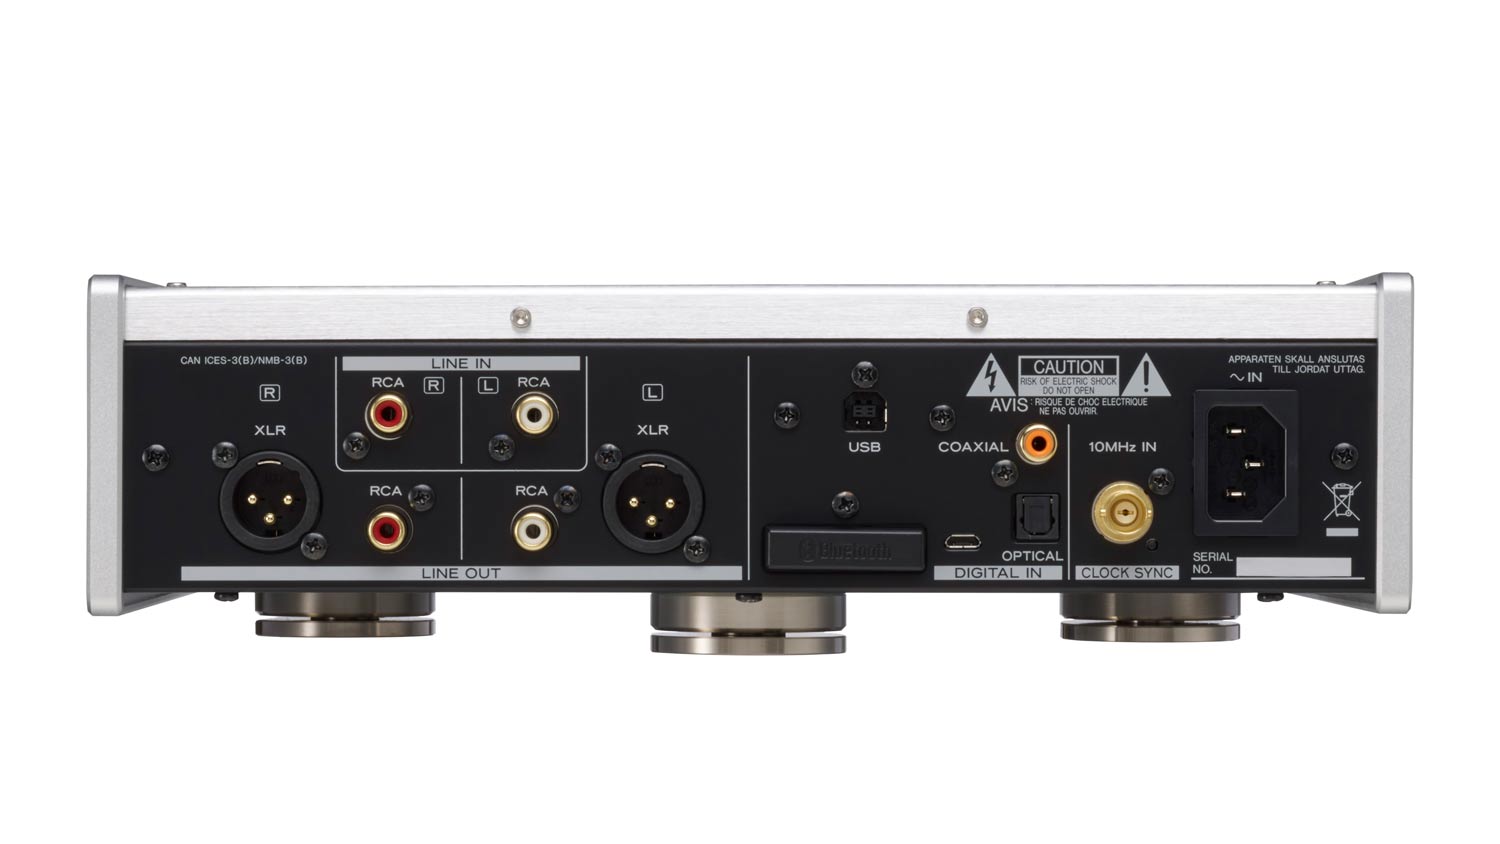 TEAC UD-505, DAC and headphone amplifier